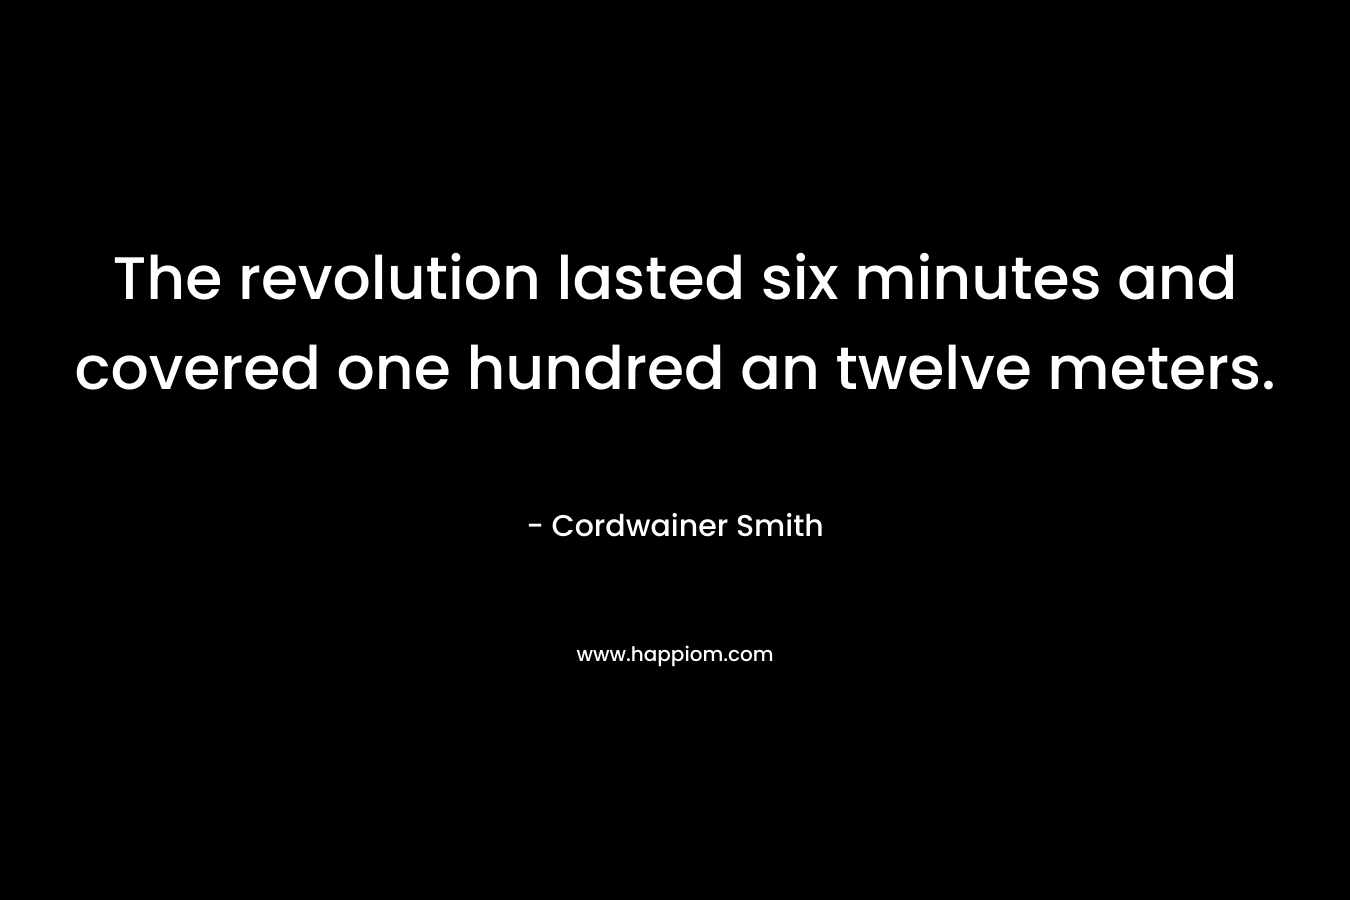 The revolution lasted six minutes and covered one hundred an twelve meters. – Cordwainer Smith